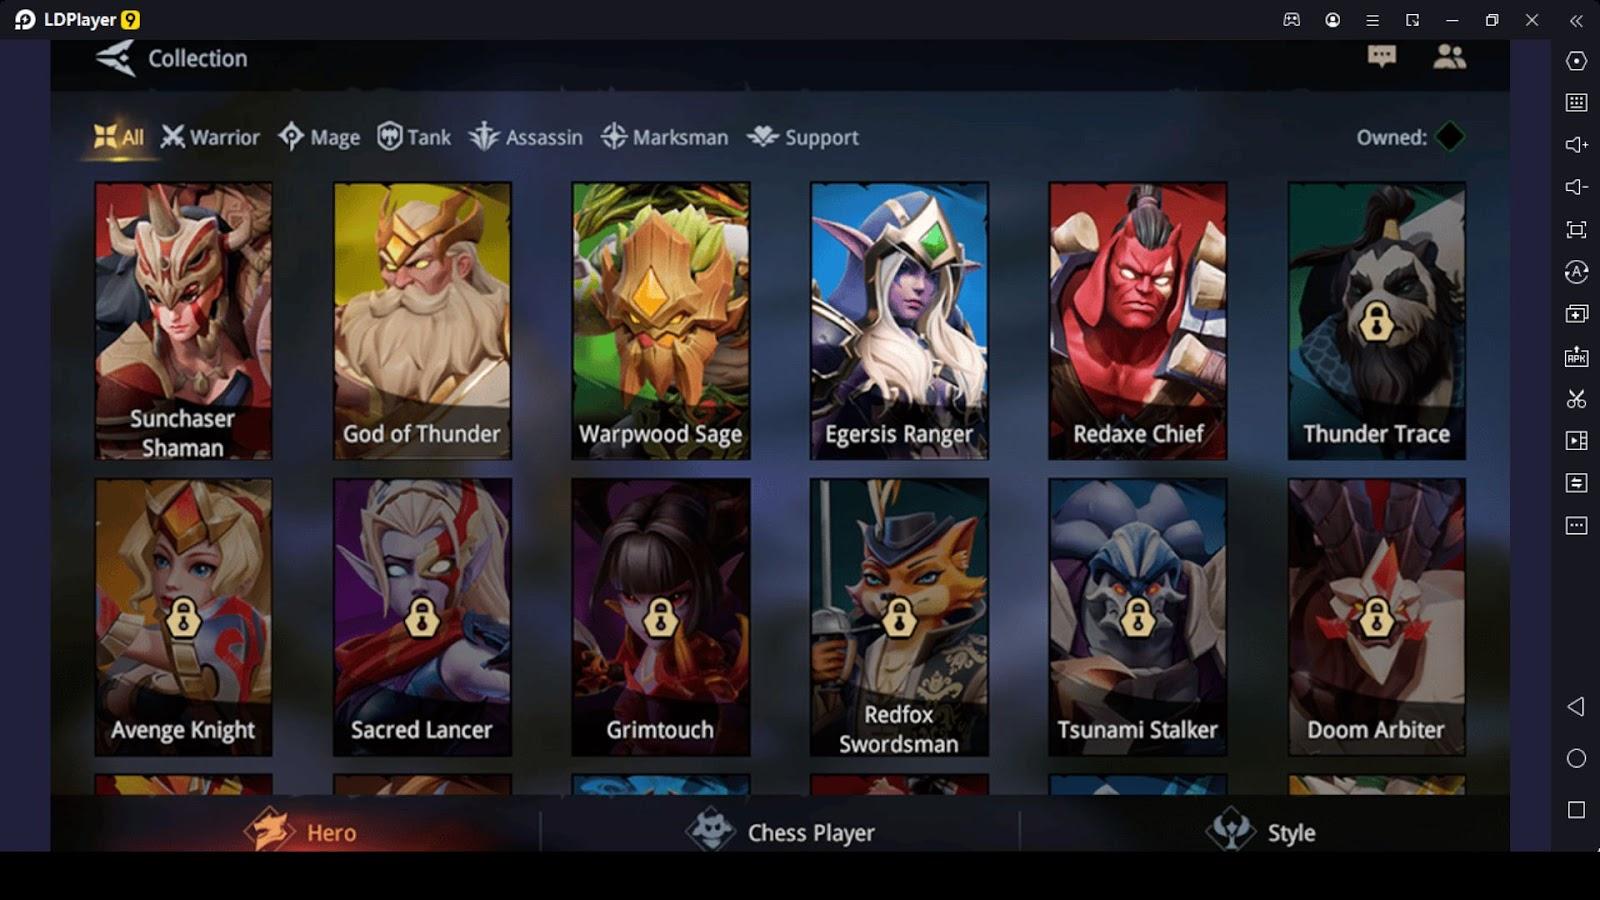 AutoChess Moba: The complete Itemization Guide and Tips